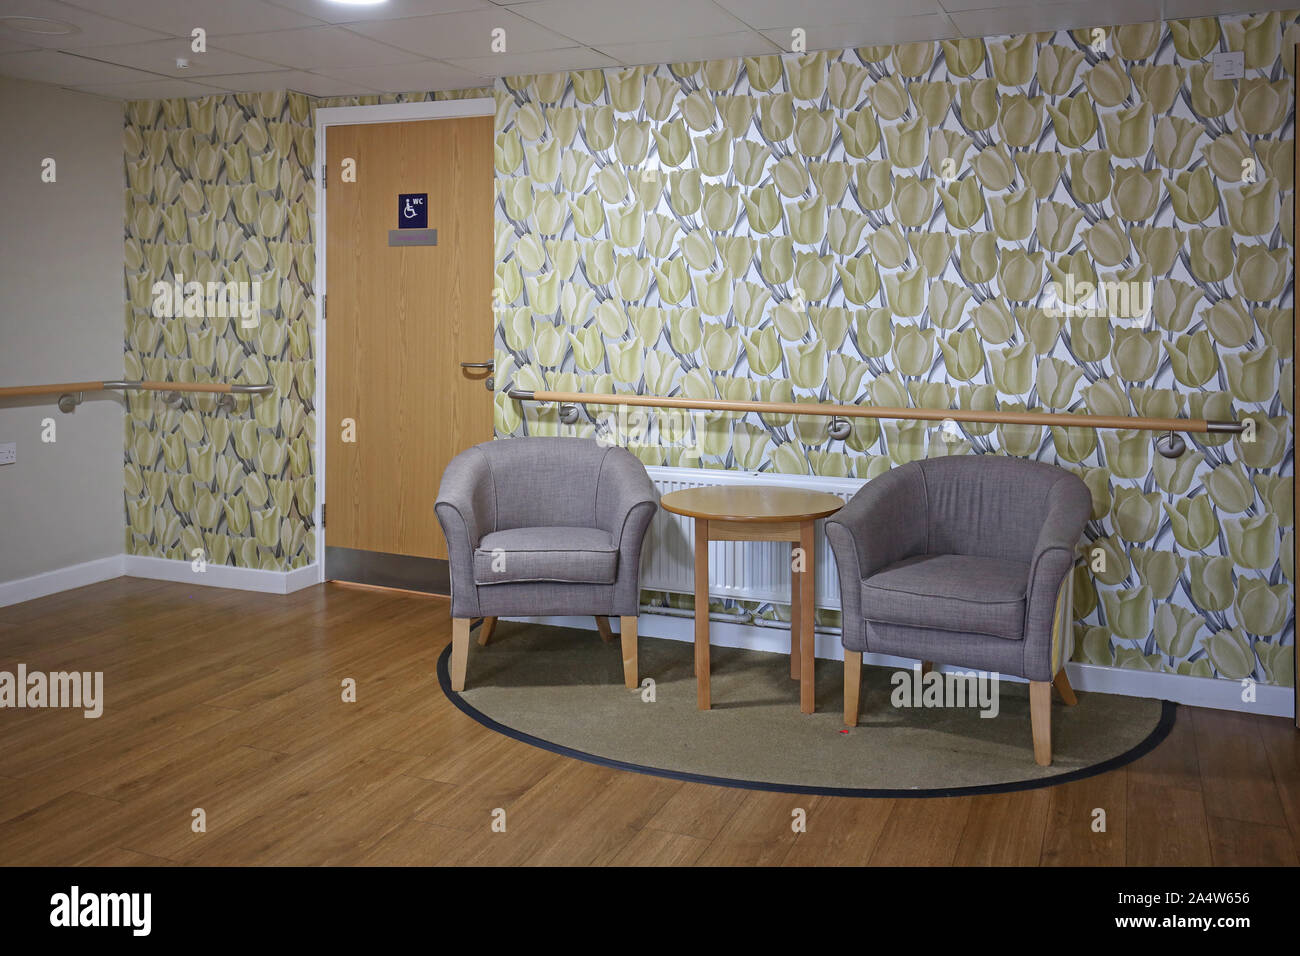 Interior of a newly refurbished care home near Wakefield, UK. Shows corridor seating area with bright wallpaper, armchairs and safety handrails. Stock Photo